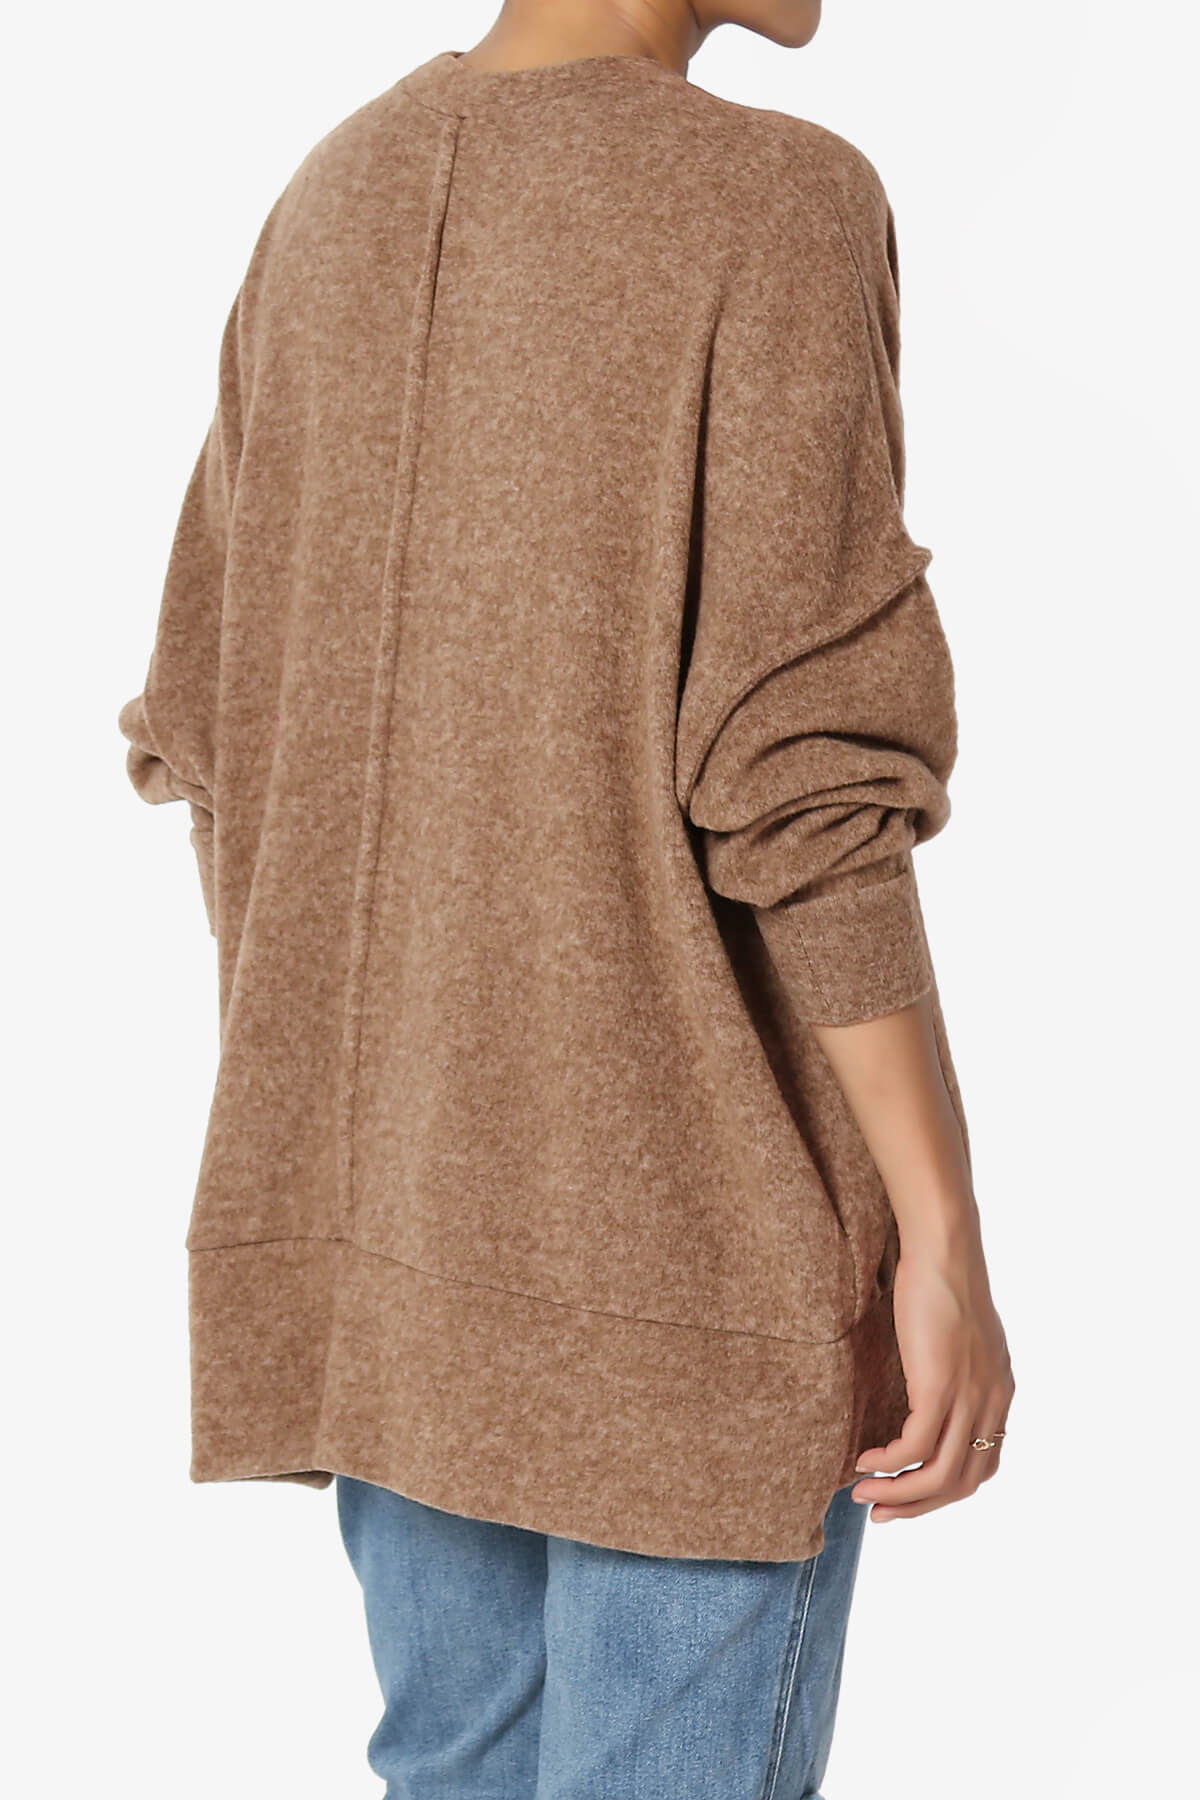 Load image into Gallery viewer, Breccan Blushed Knit Oversized Sweater DARK CAMEL_4
